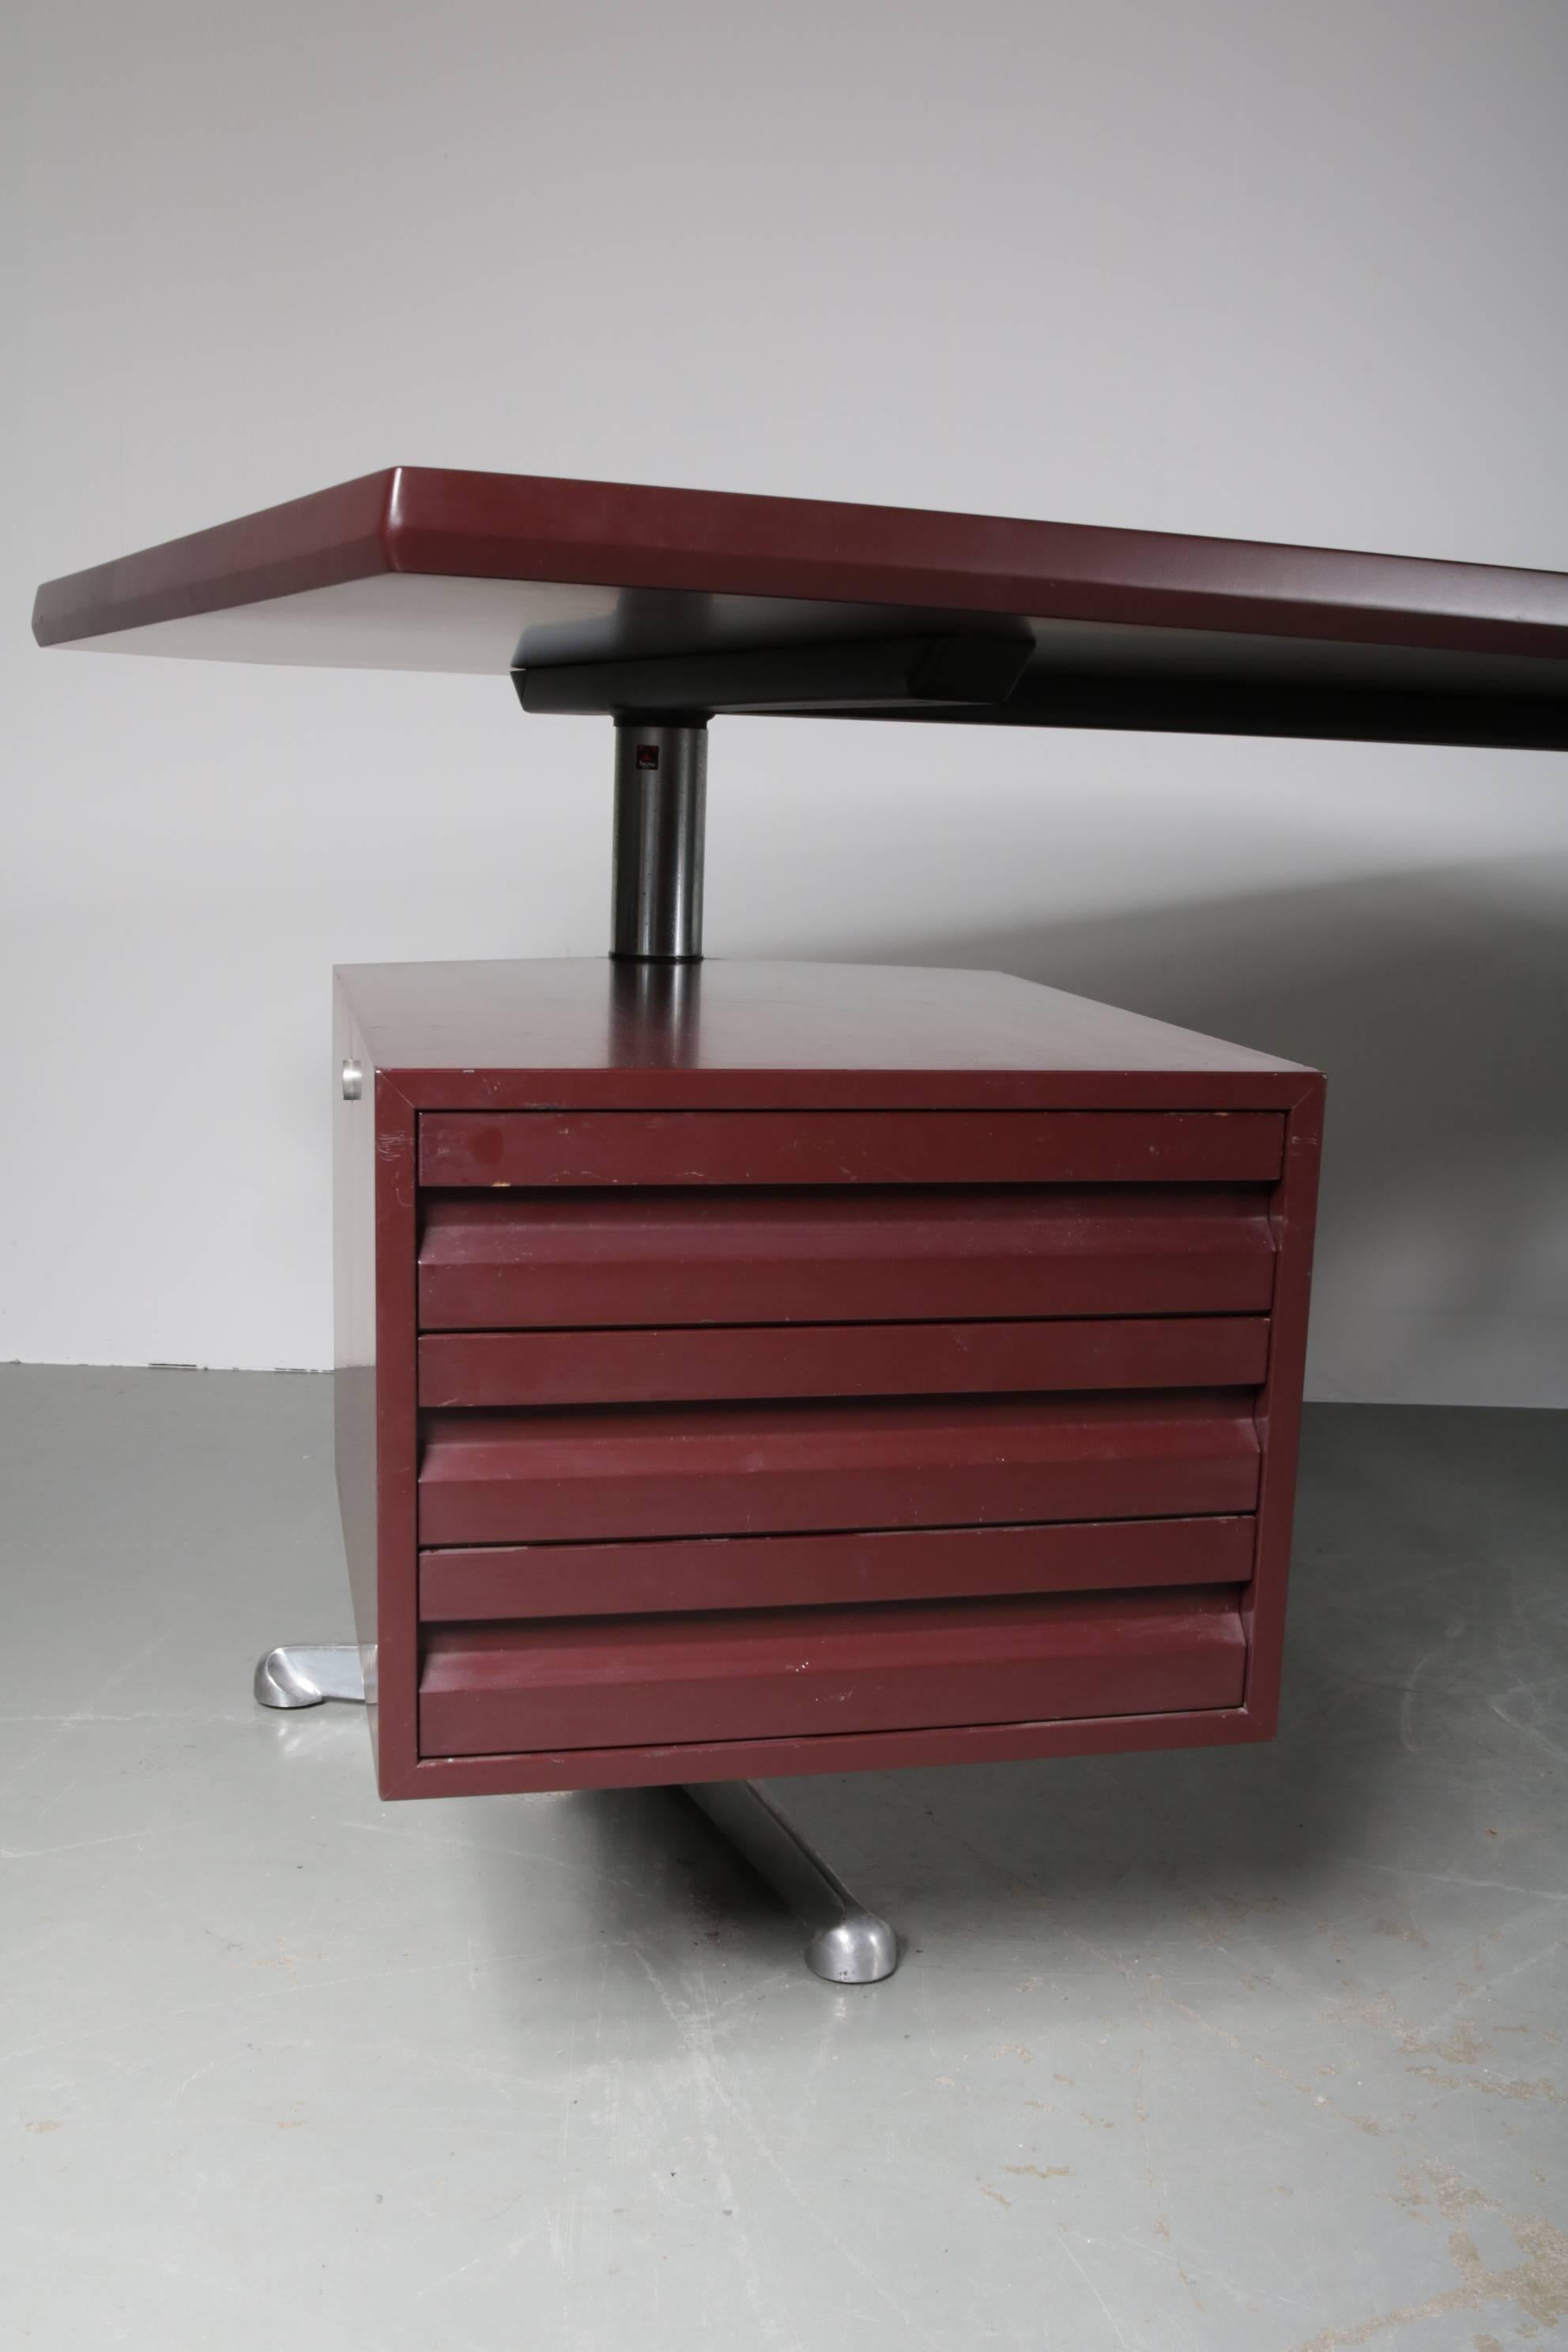 Beautiful large executive desk designed by Osvaldo Borsani, manufactured by Tecno Milano in Italy, circa 1950.

This eye-catching desk has a unique design with the integrated drawer that is adjustable in position, making it a versatile piece with